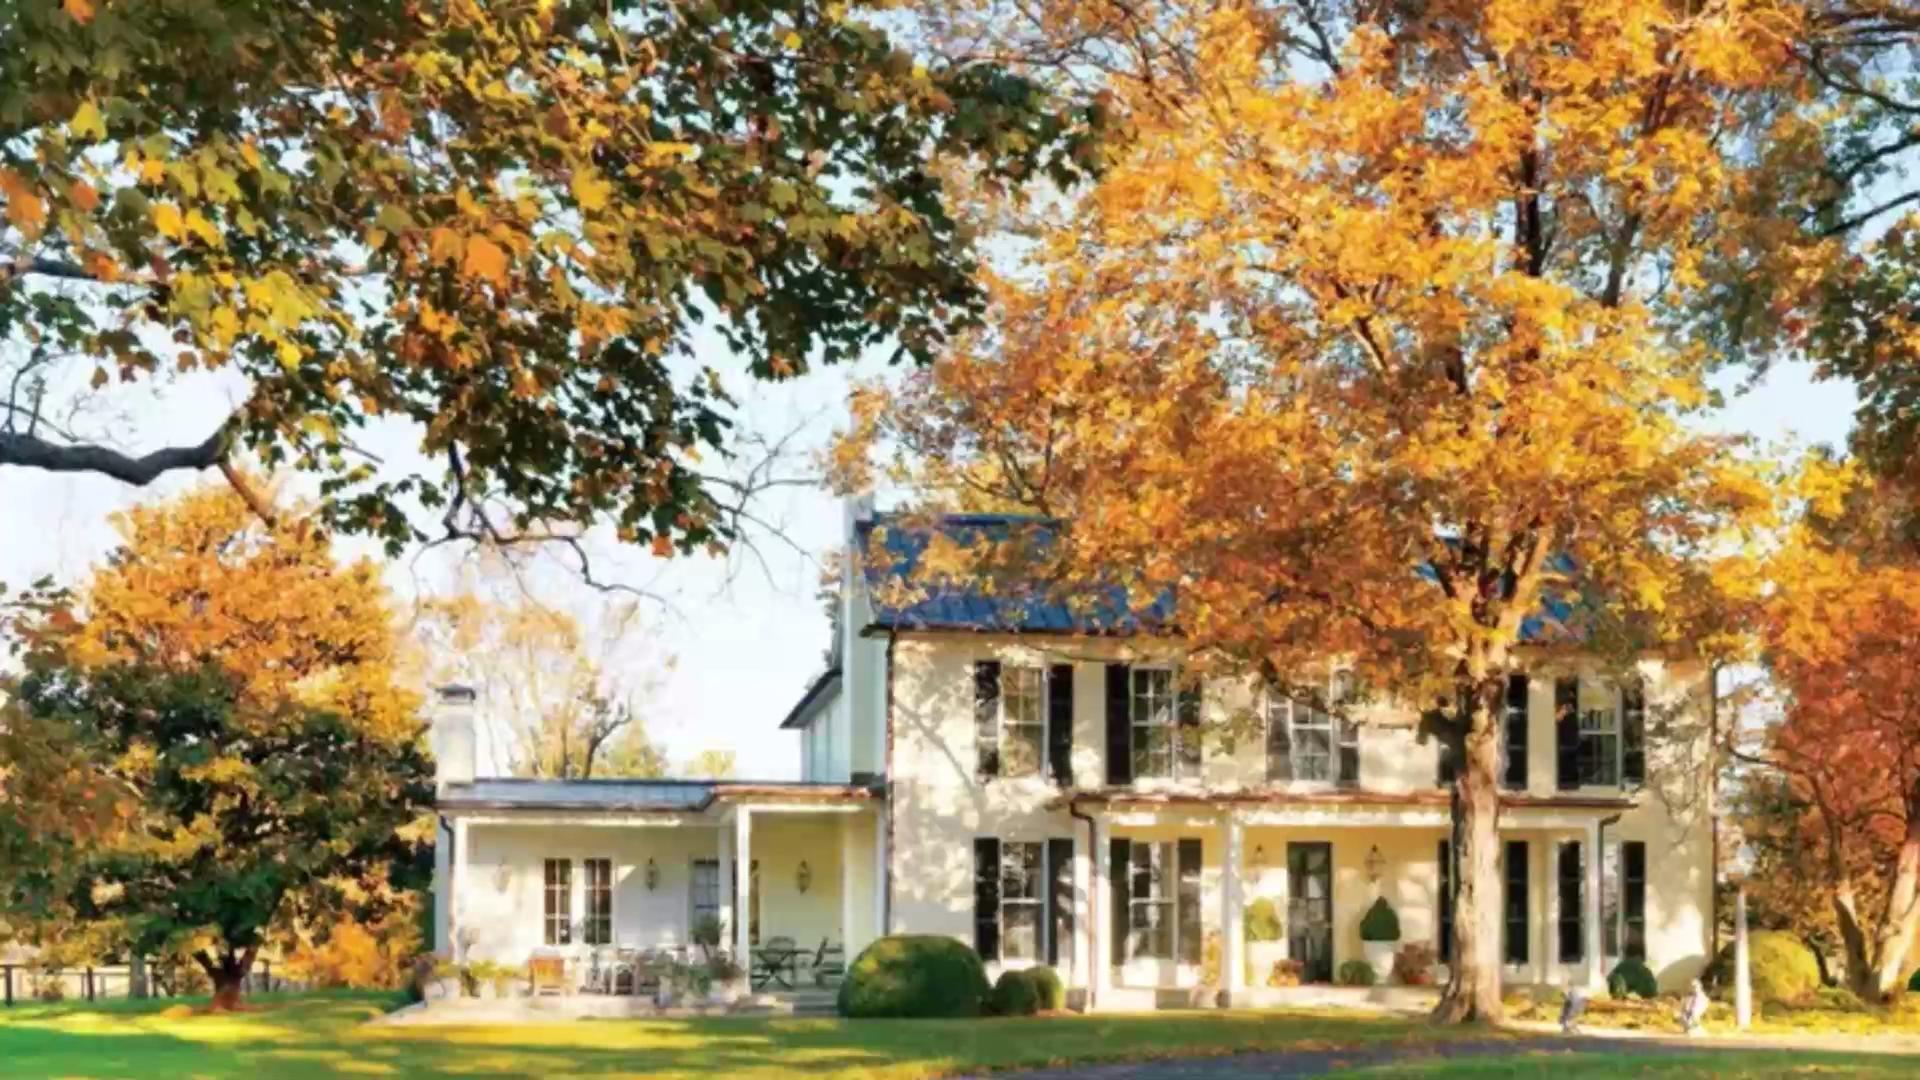 This Kentucky Farmhouse Is The Perfect Blend Of Old And New